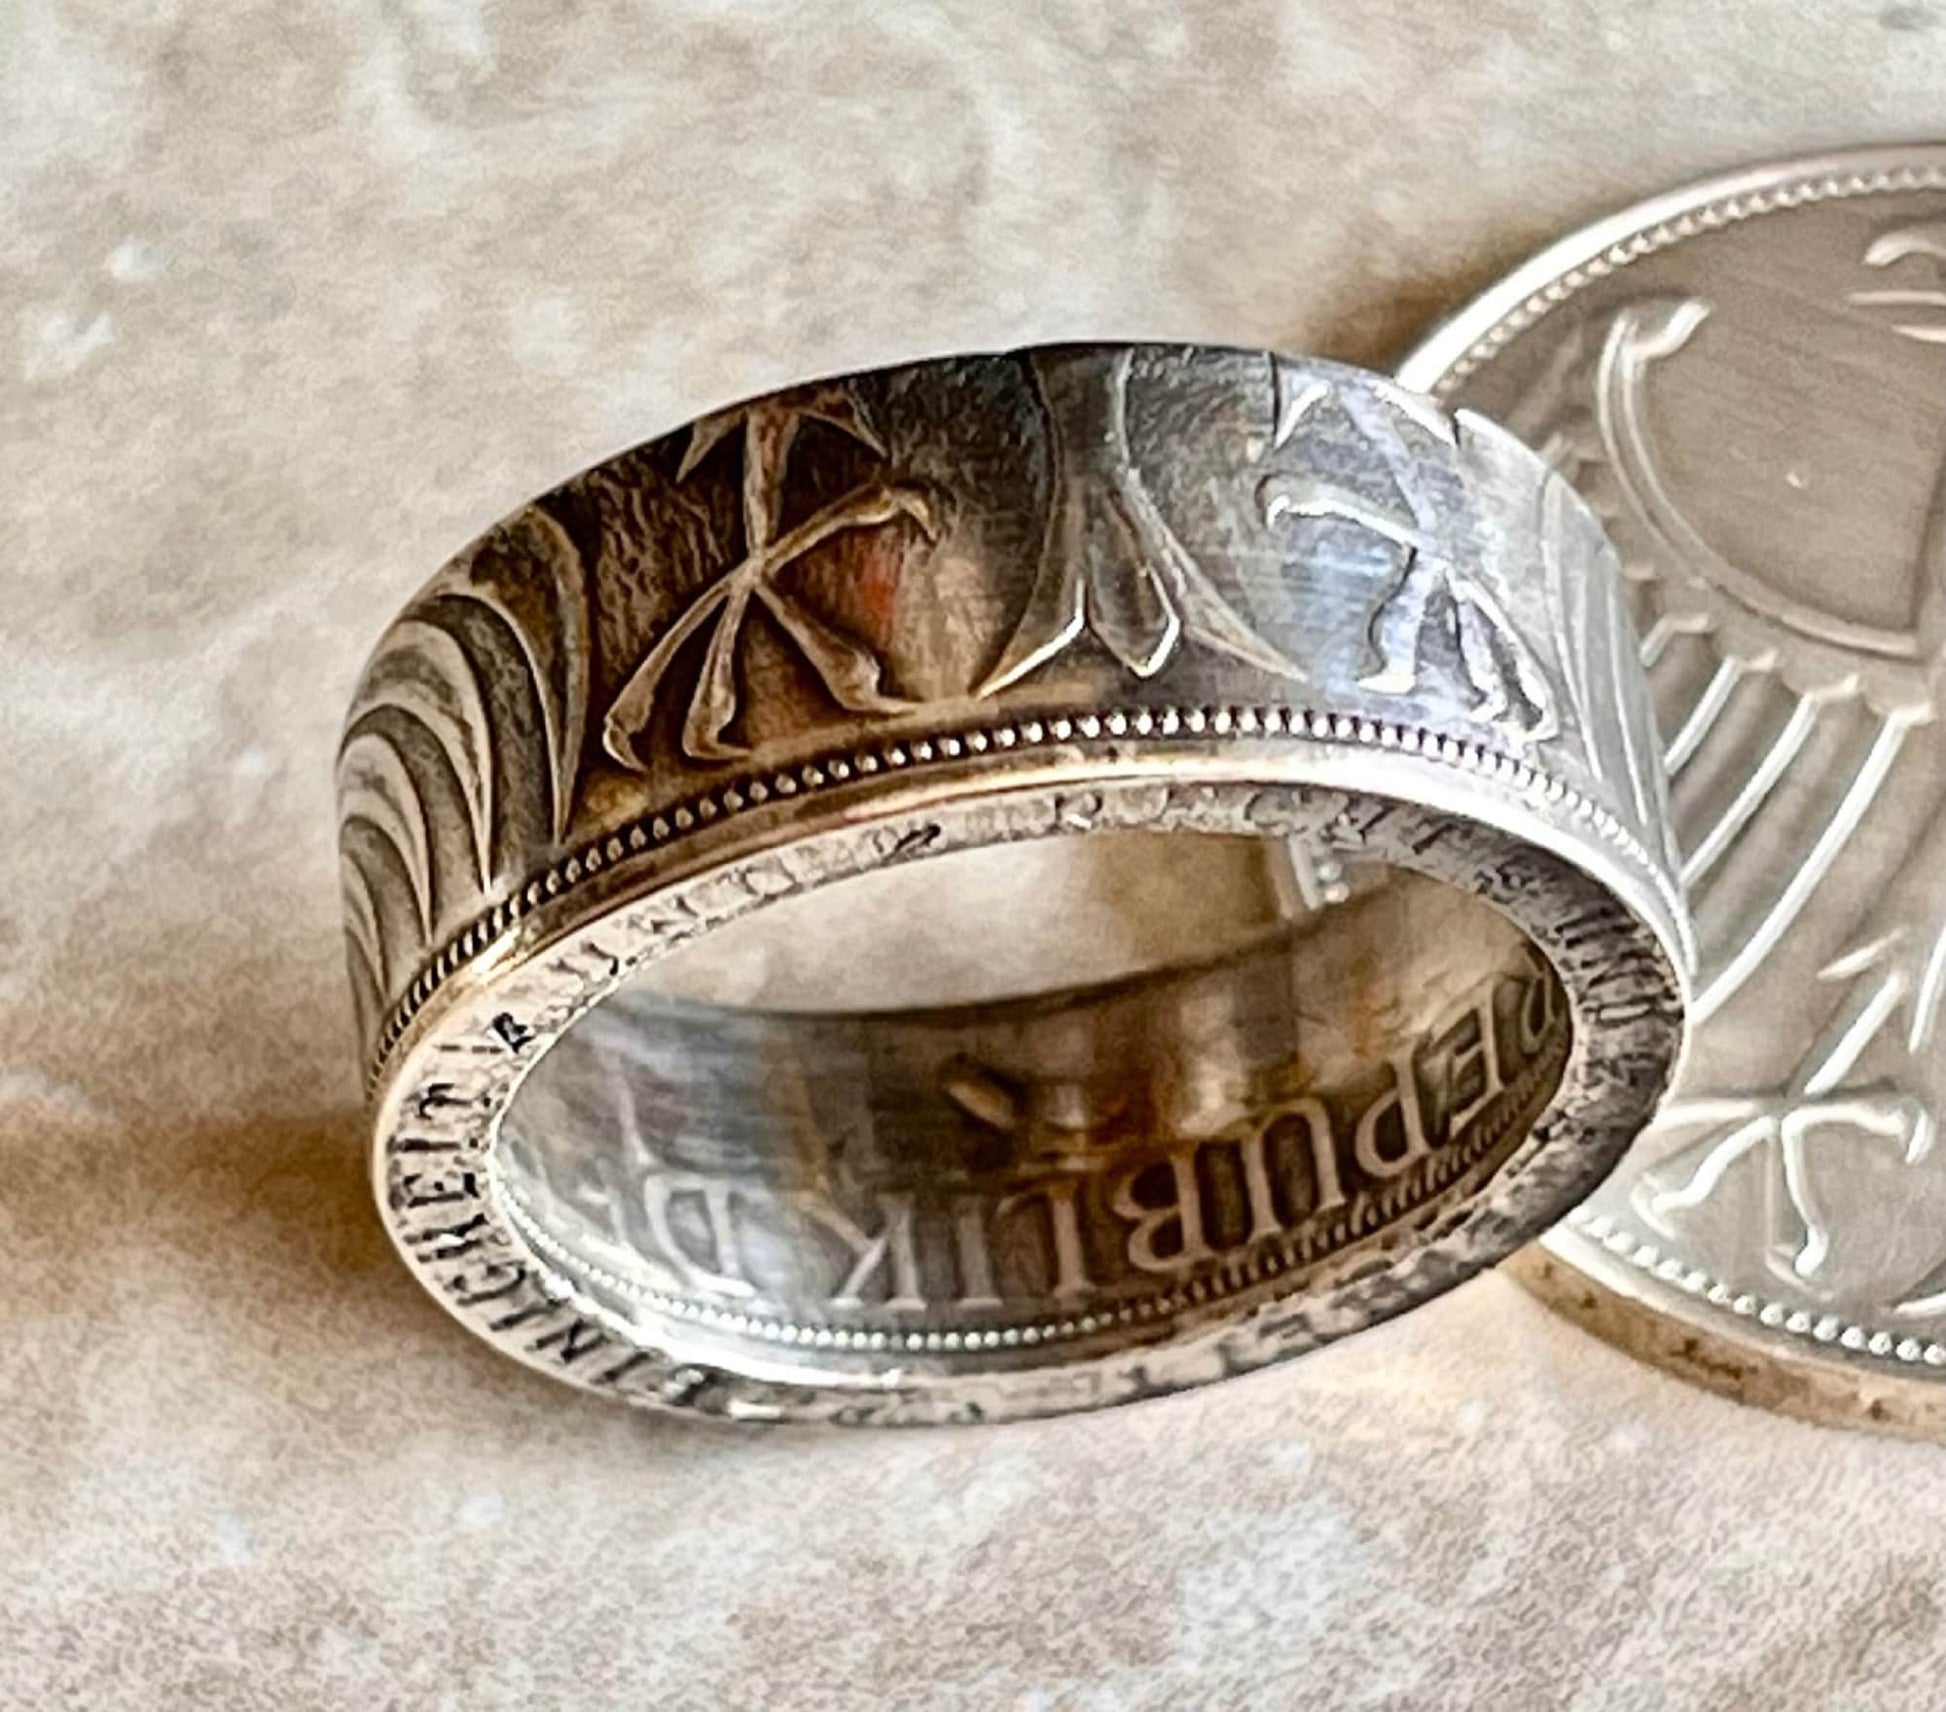 Germany Coin Ring Silver Eagle 5 German Mark Handmade Personal Custom Ring Gift For Friend Coin Ring Gift For Him Her World Coin Collector